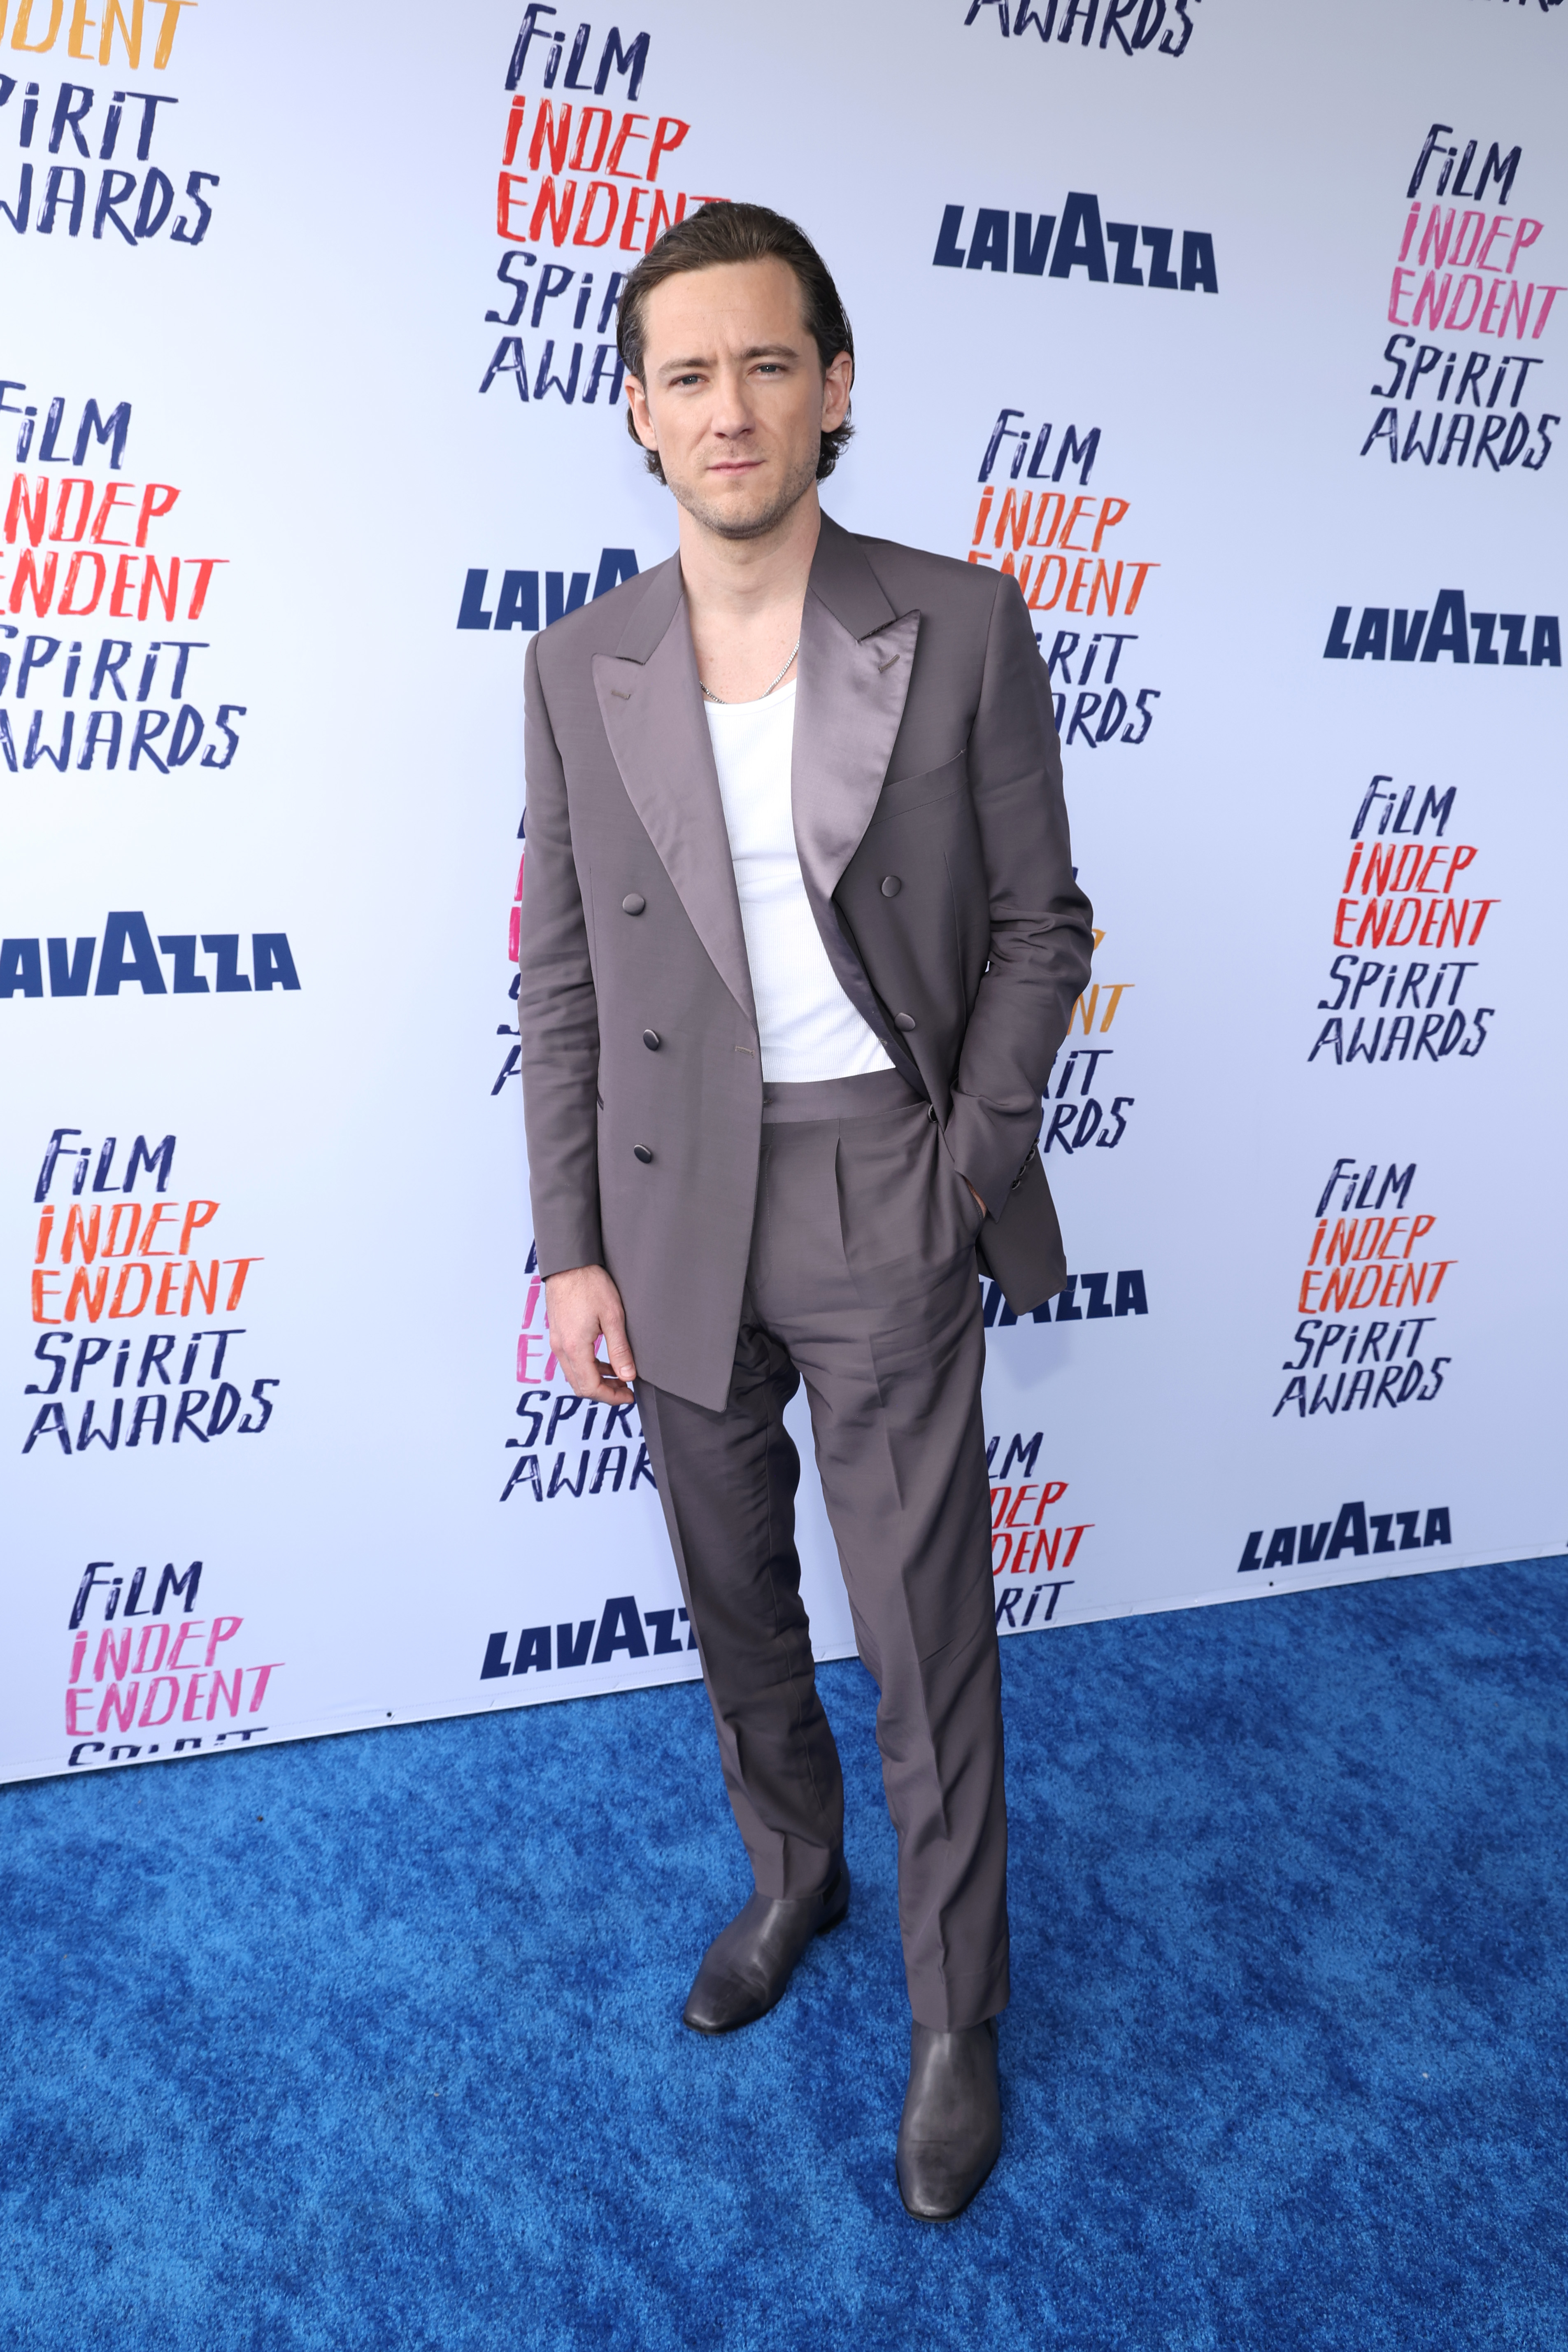 Lewis  wearing a blazer over an open-collar shirt, paired with tailored trousers and boots